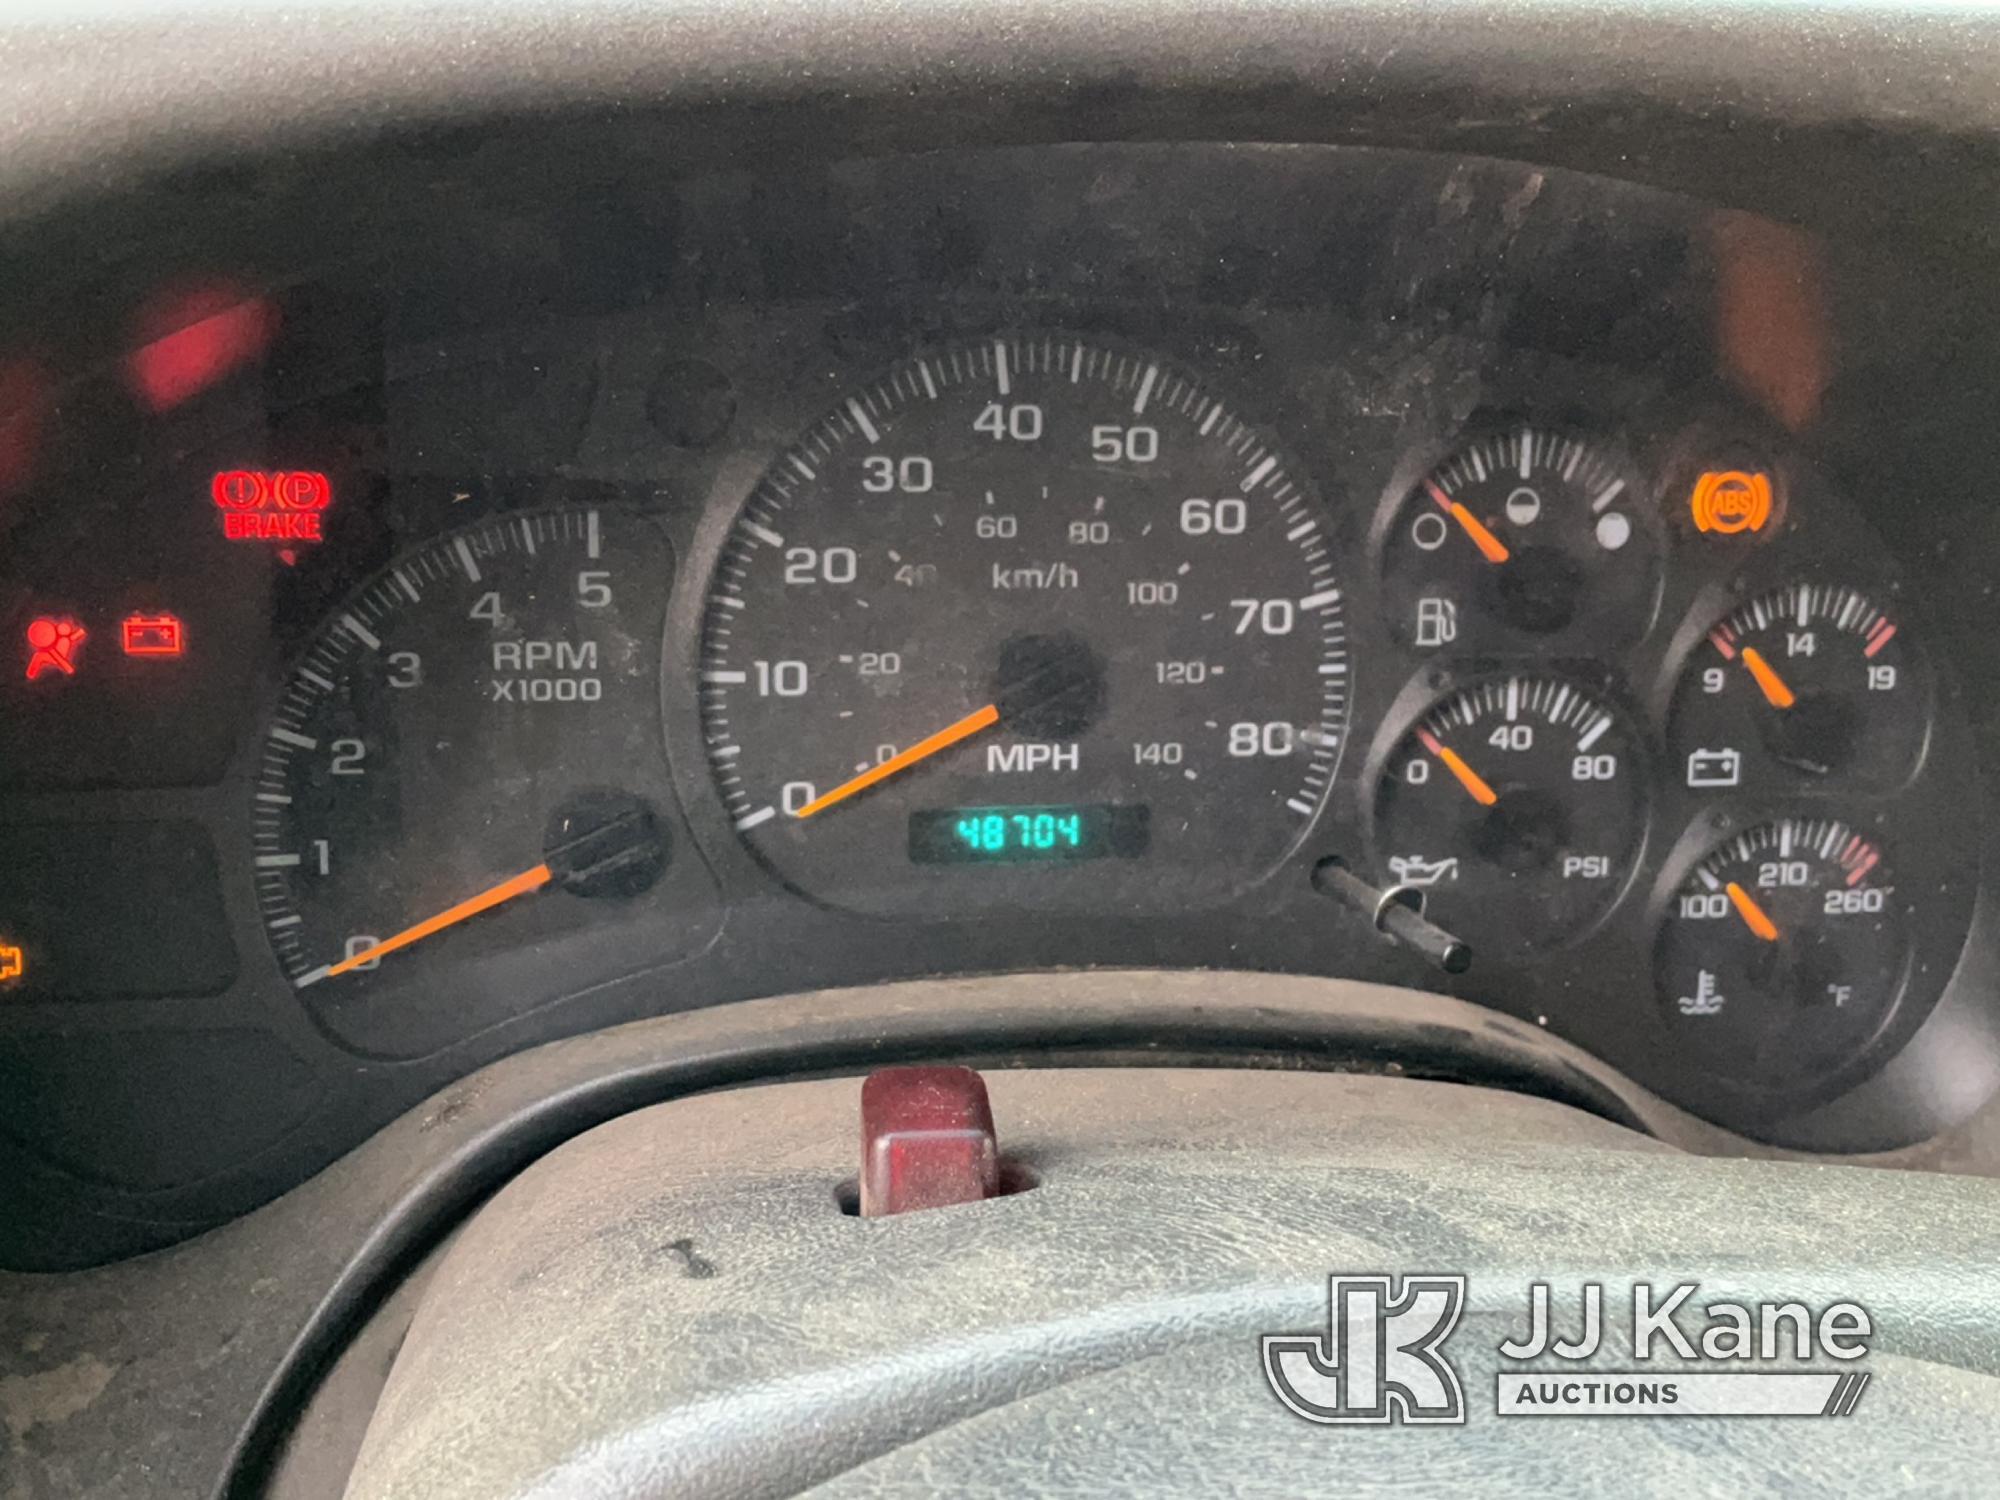 (Conway, AR) 2009 GMC C6500 Chipper Dump Truck Runs) (Does Not Move, Trans Out, Odometer Does Not Tr